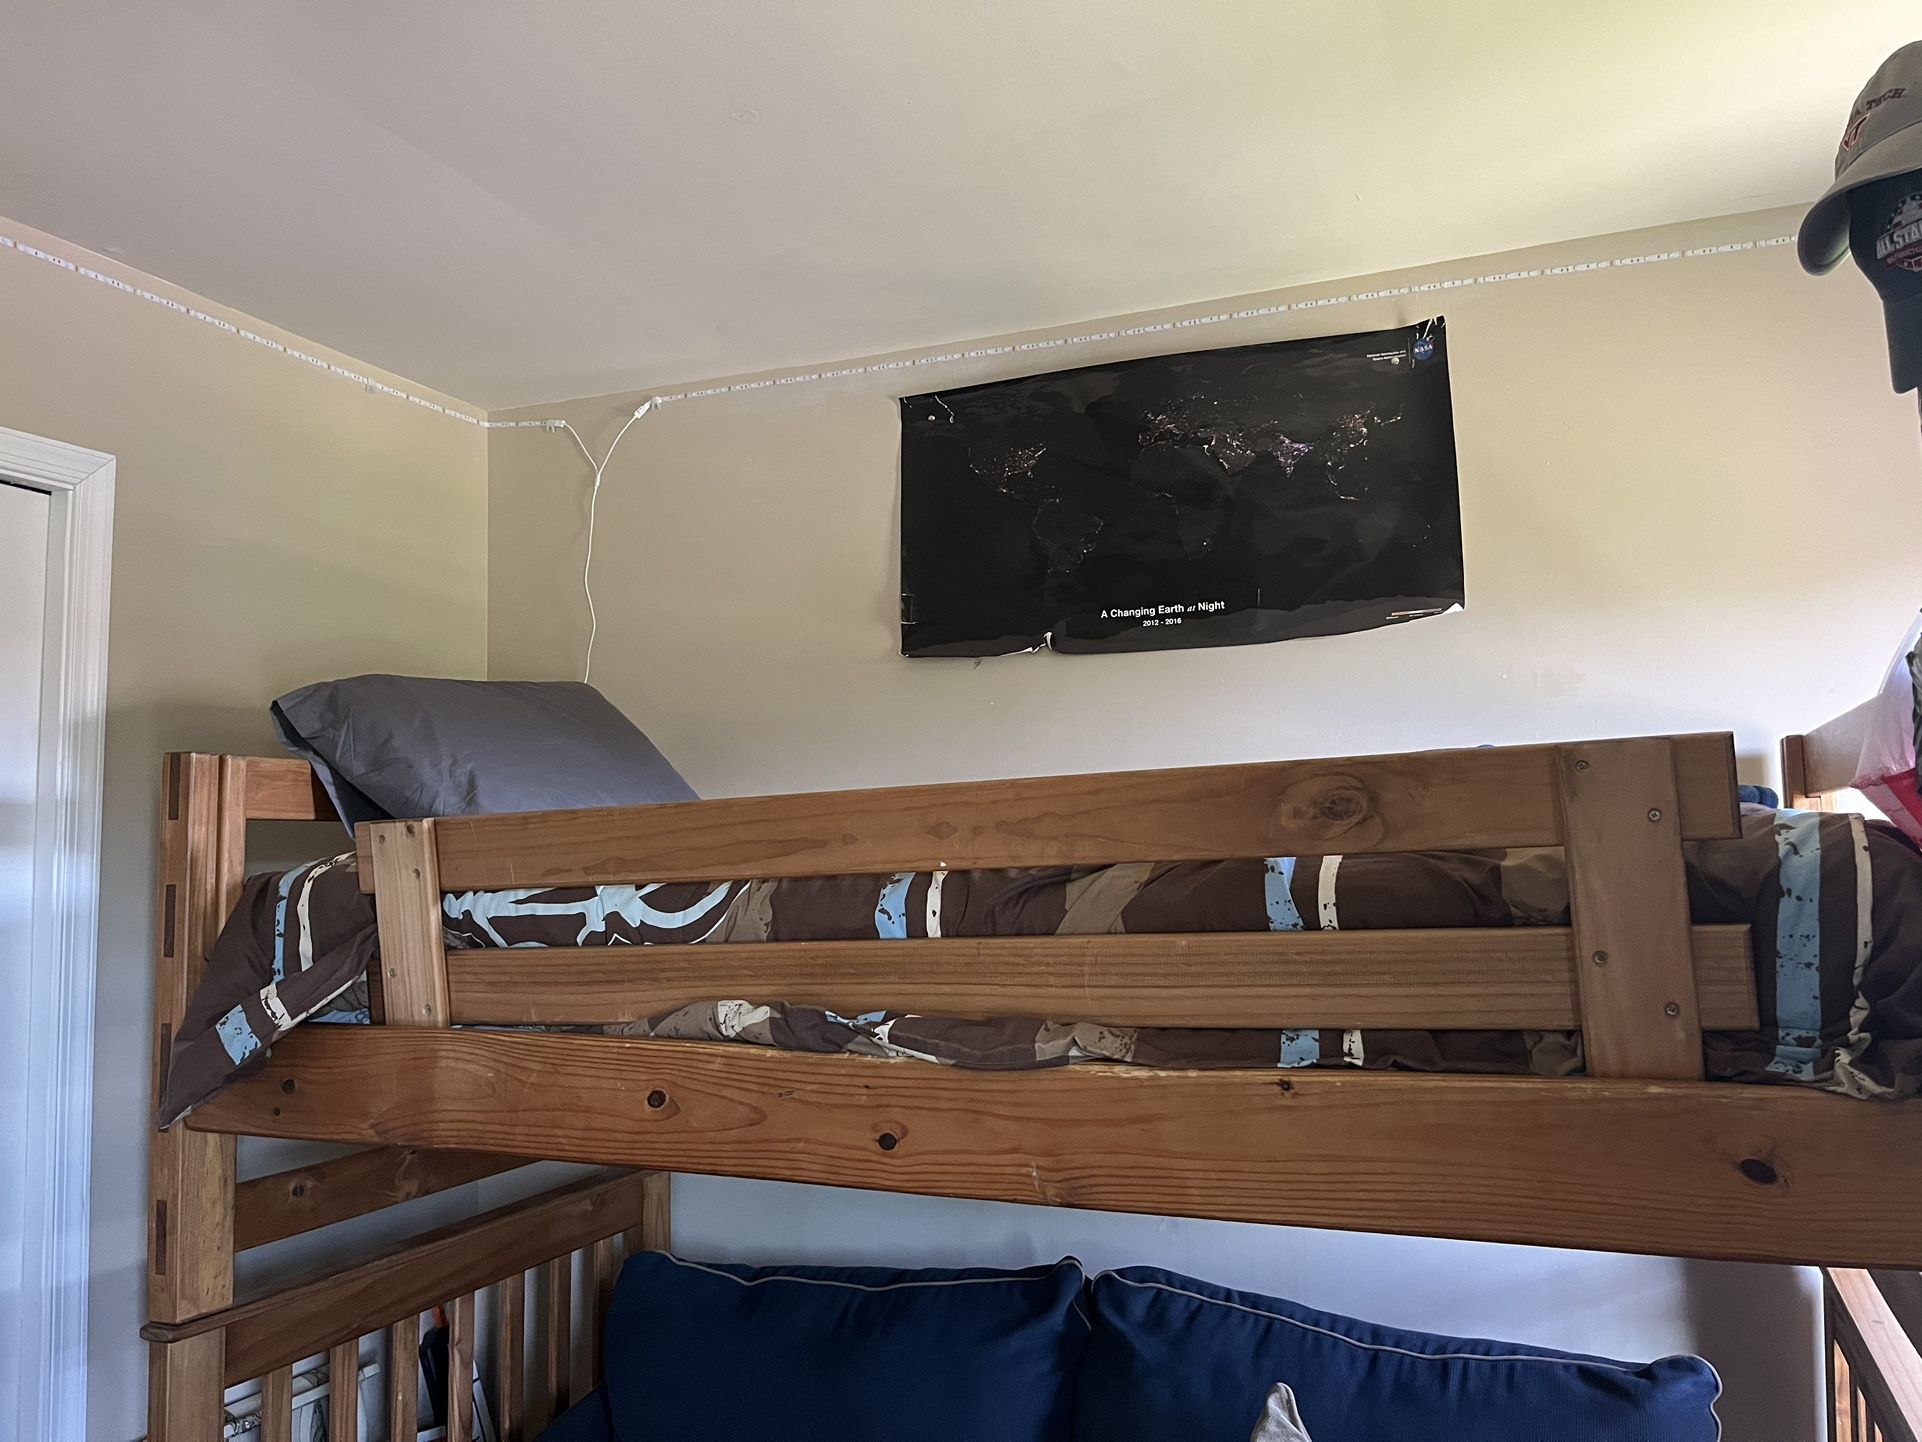 Twin Bunk Beds - All Wood! Very Sturdy And Can Easily Be Painted Or Stay Natural